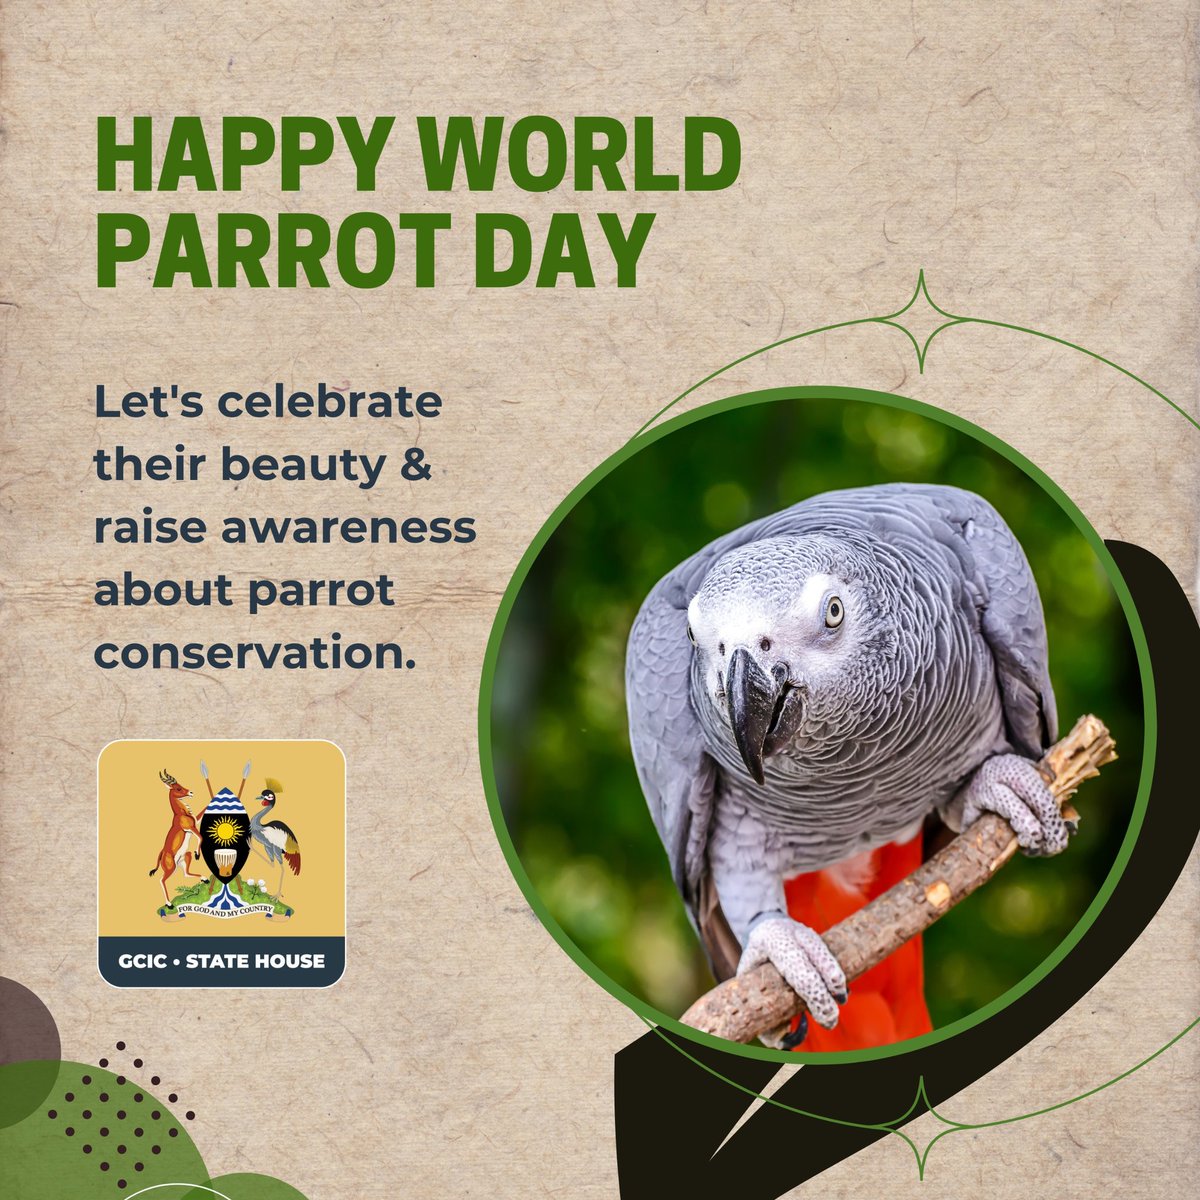 As we celebrate World Parrot Day, let us raise awareness about the African grey parrot conservation. #ExploreUg #OpenGovUg